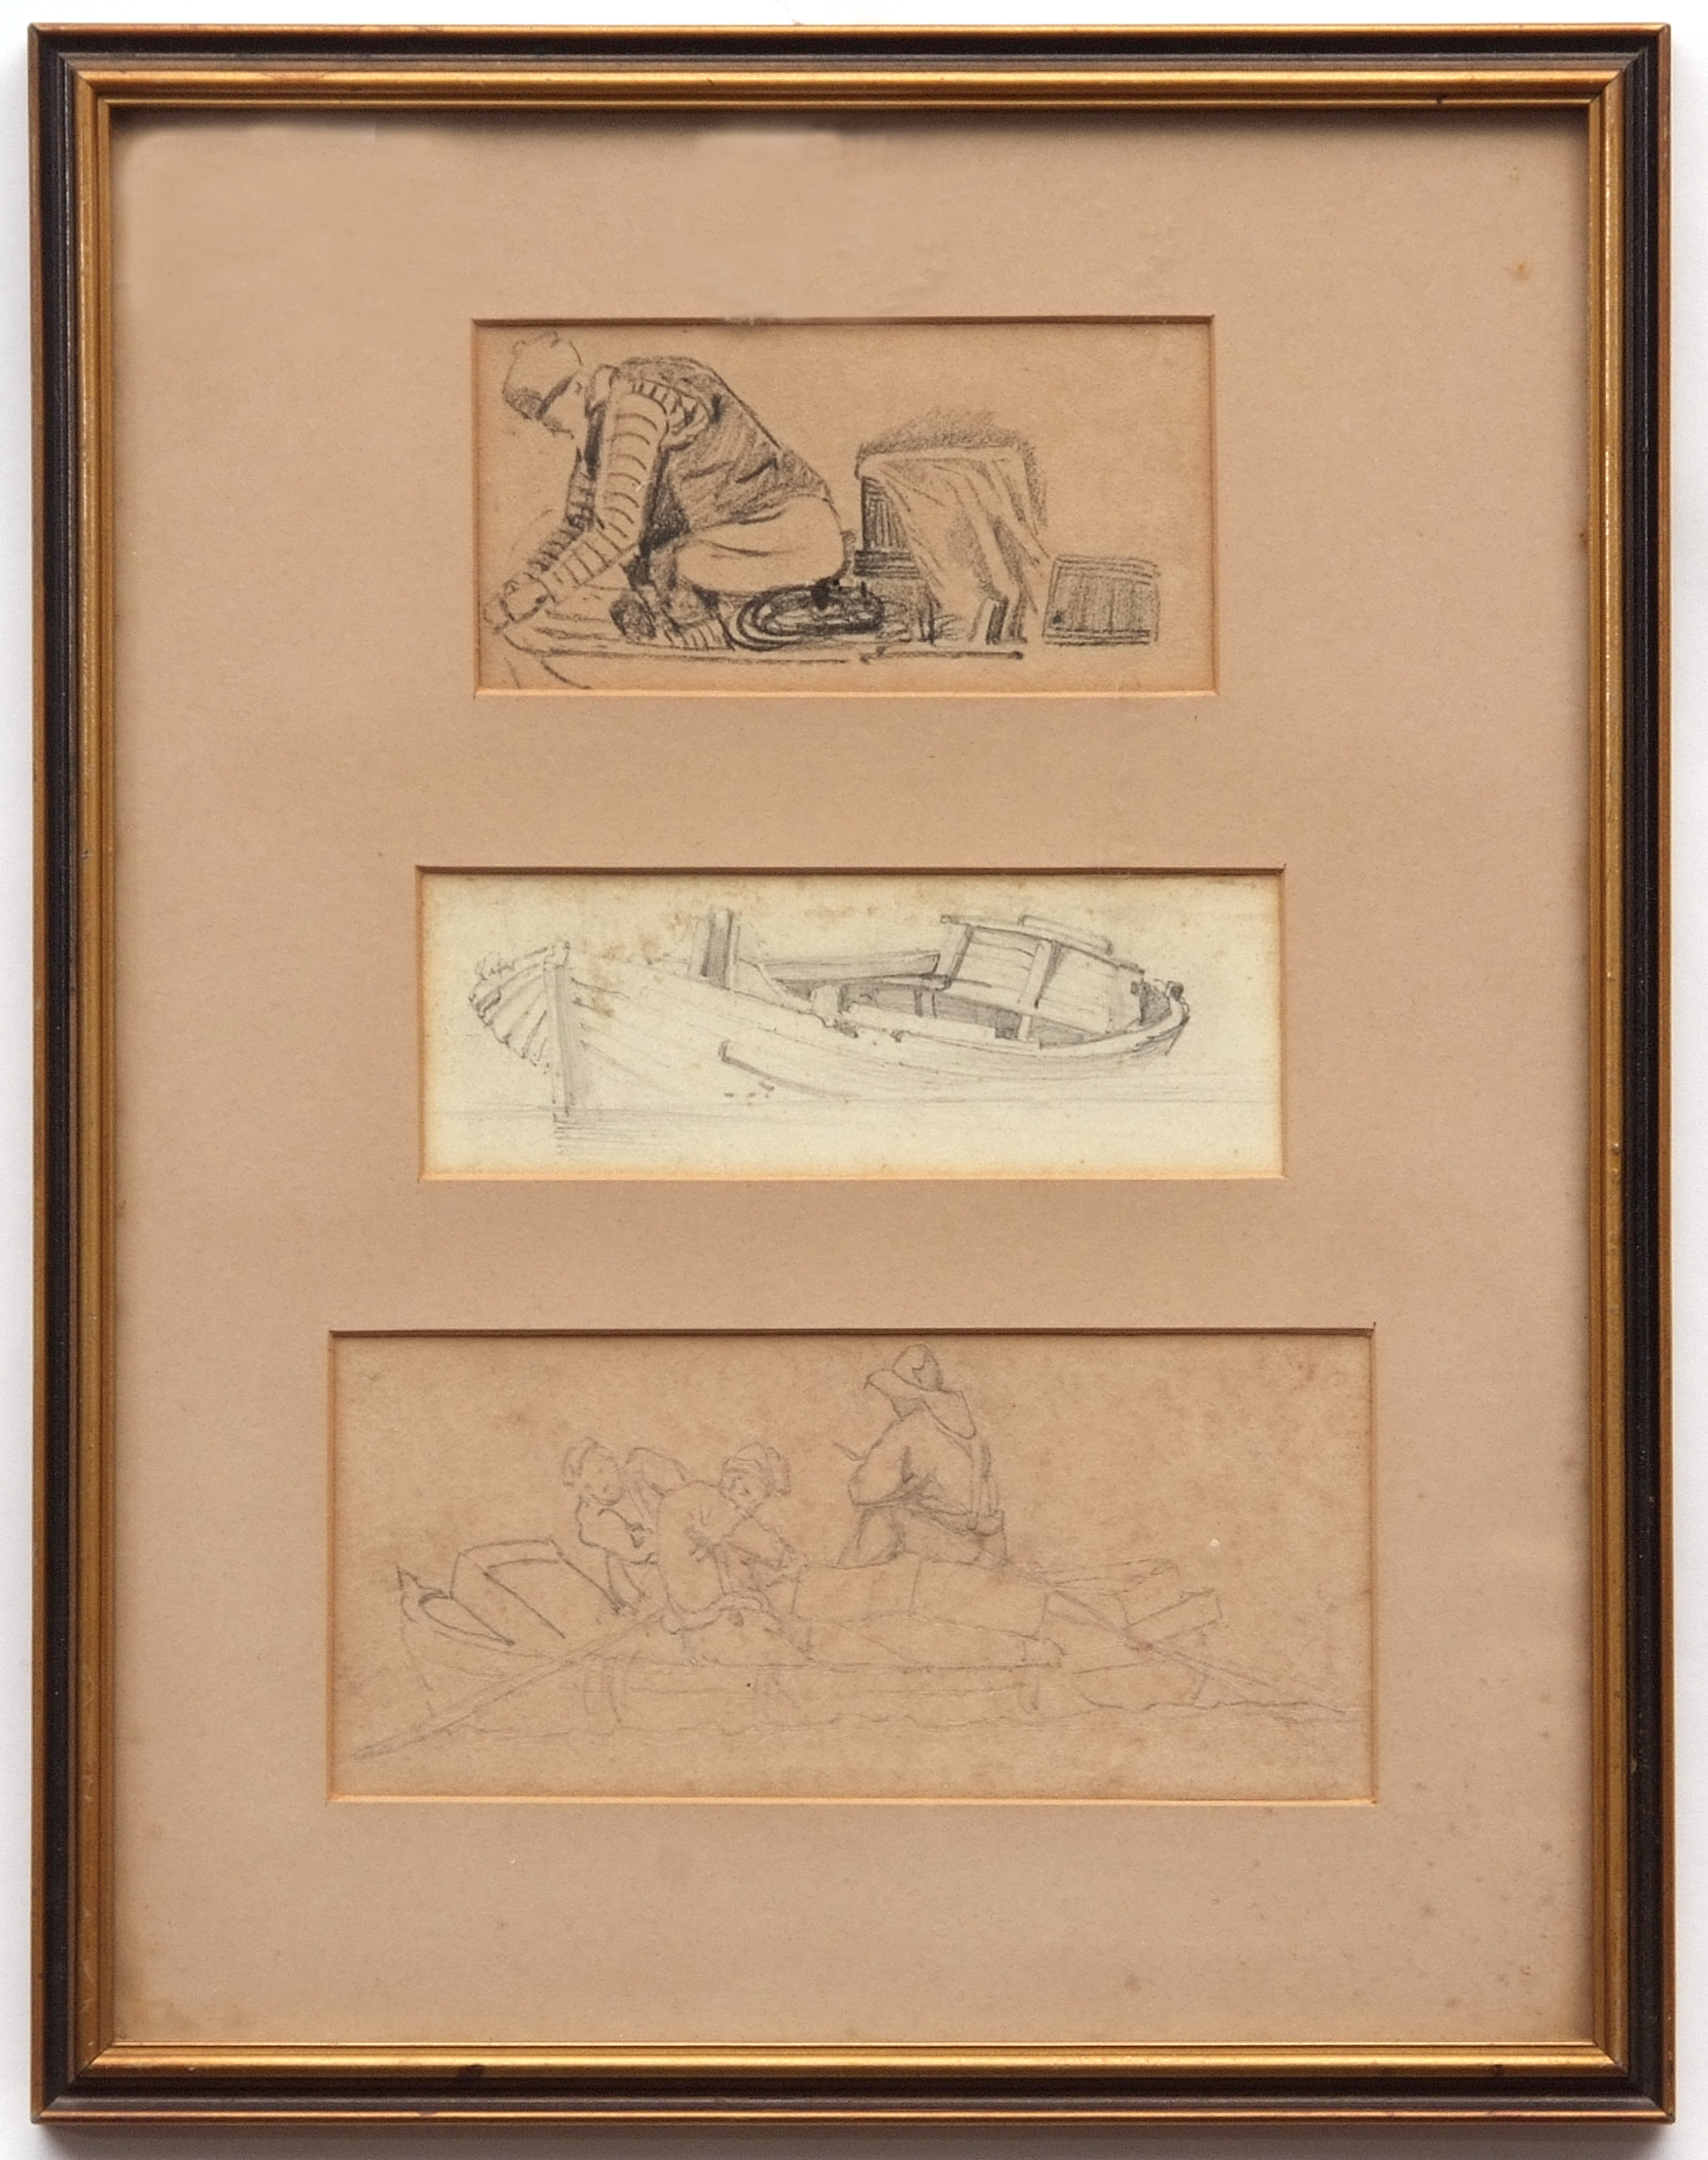 JOSEPH STANNARD (1797-1830) Boat and Figure studies group of three pencil drawings in one frame - Image 2 of 2